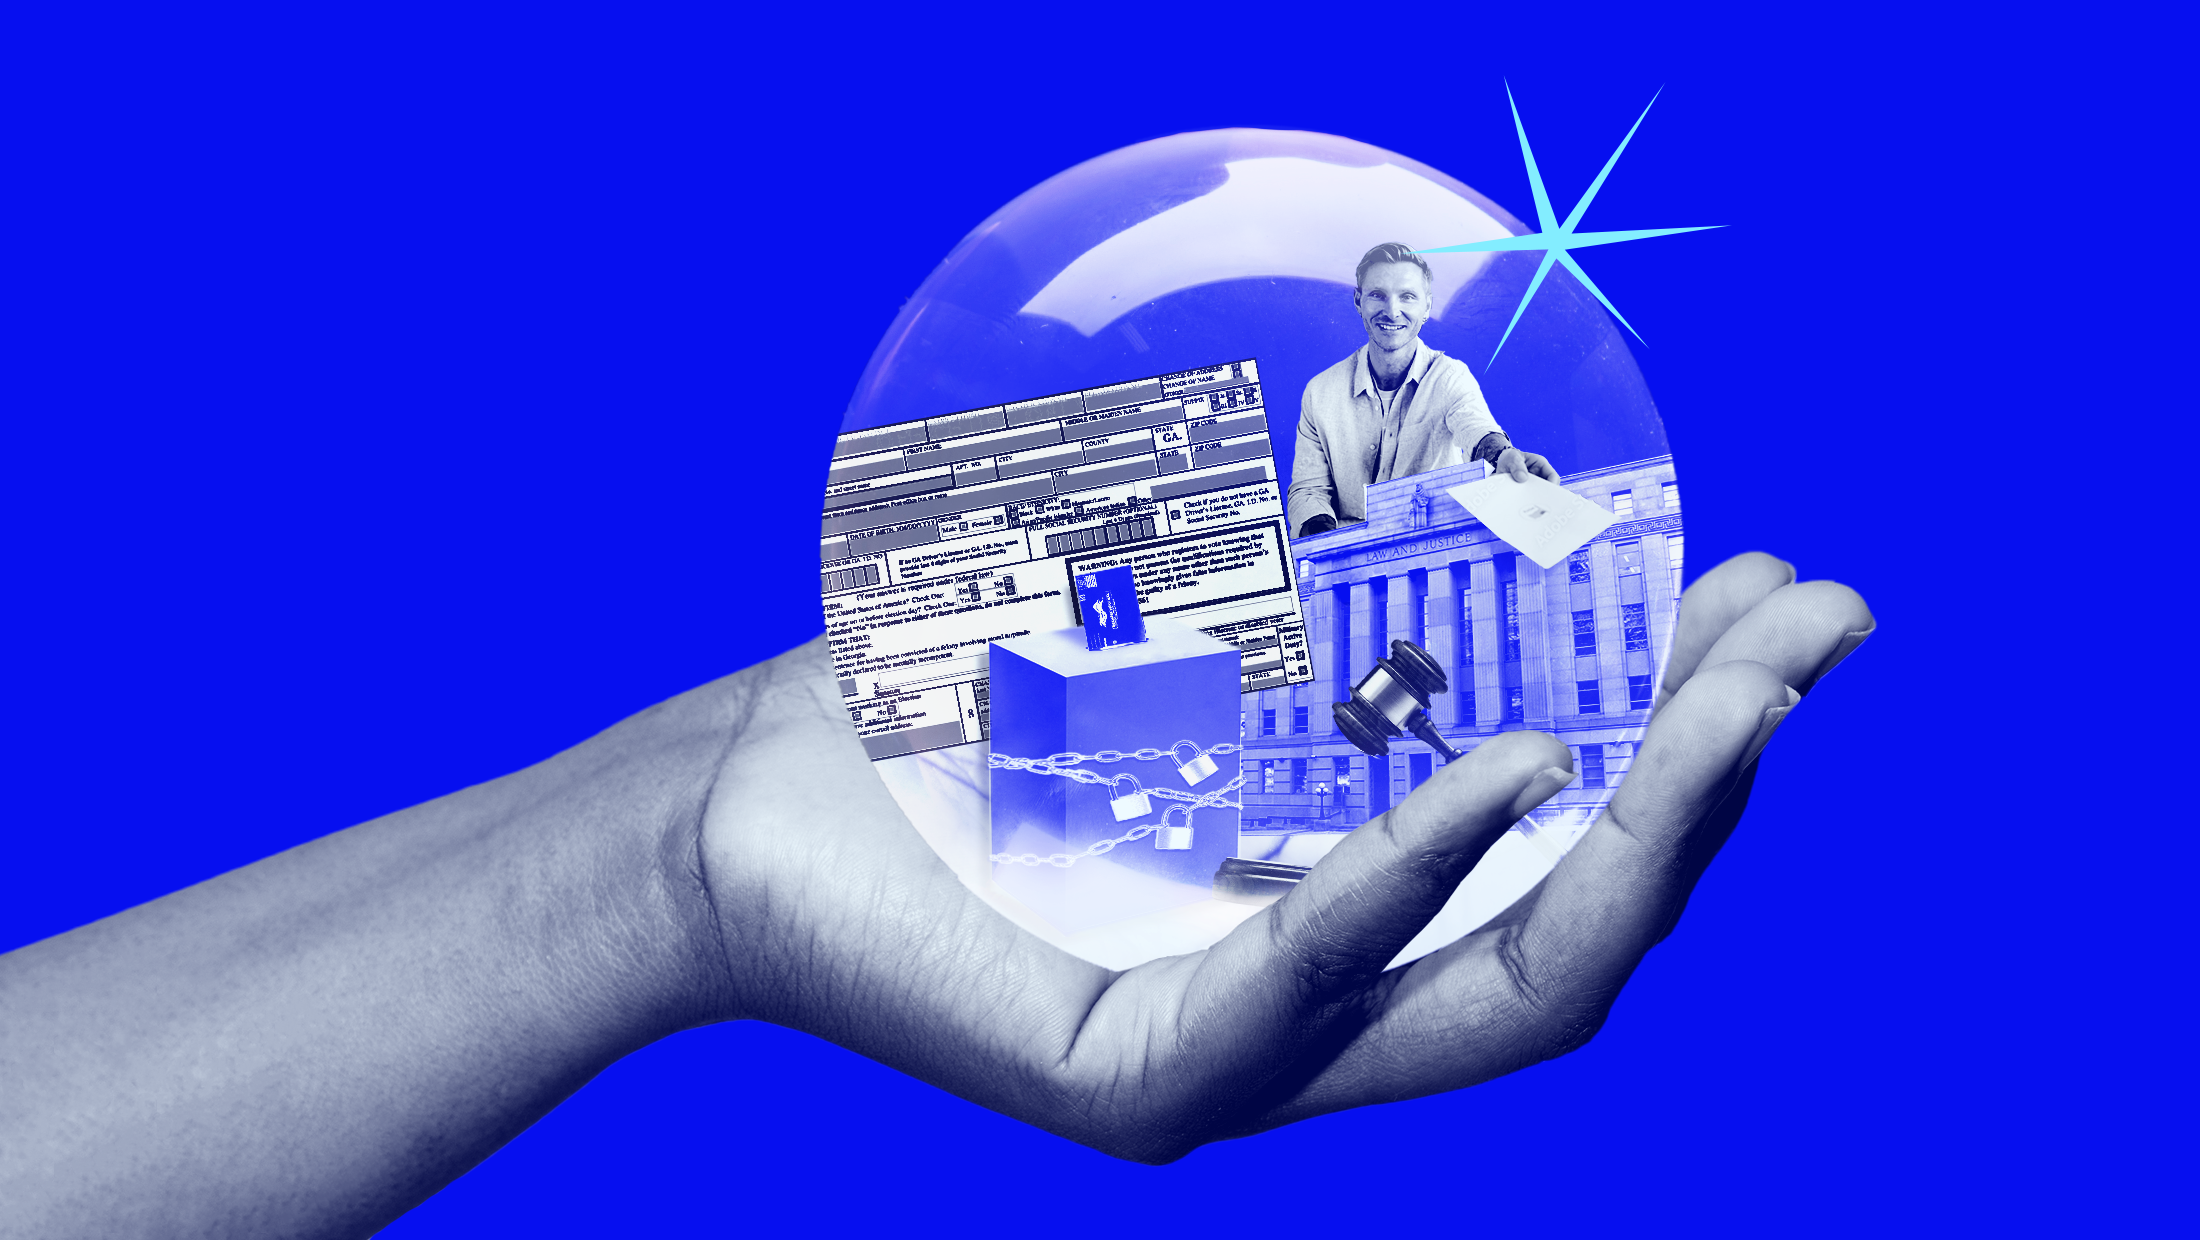 A bright blue background with a hand holding a crystal ball revealing a locked up drop box, a voter registration form, an election official, the North Carolina Supreme Court building and a gavel